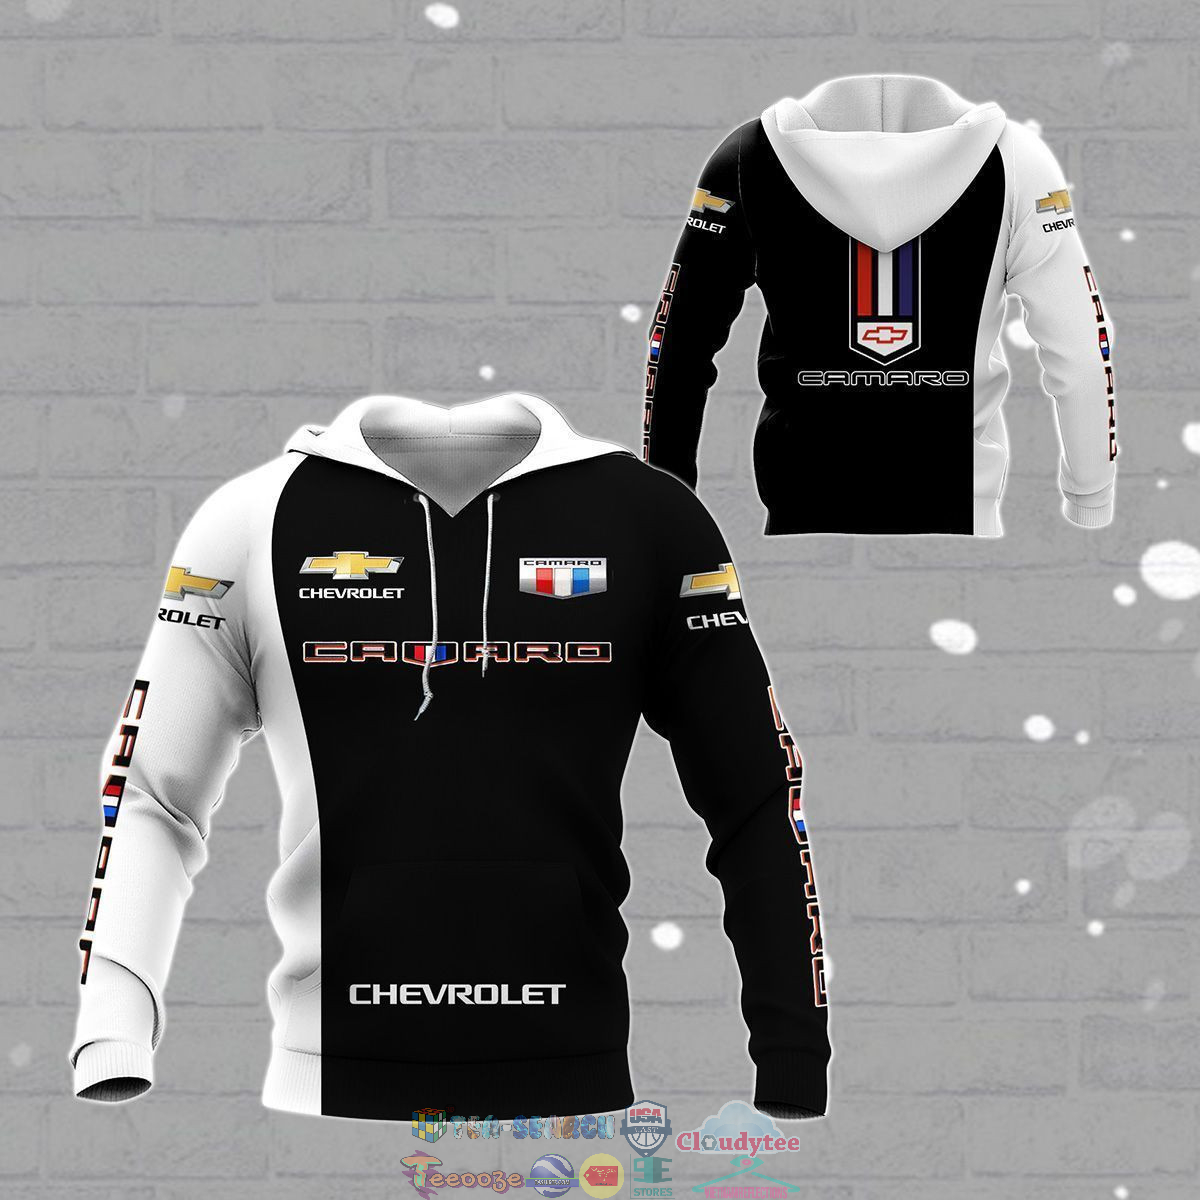 Chevrolet Camaro ver 4 3D hoodie and t-shirt